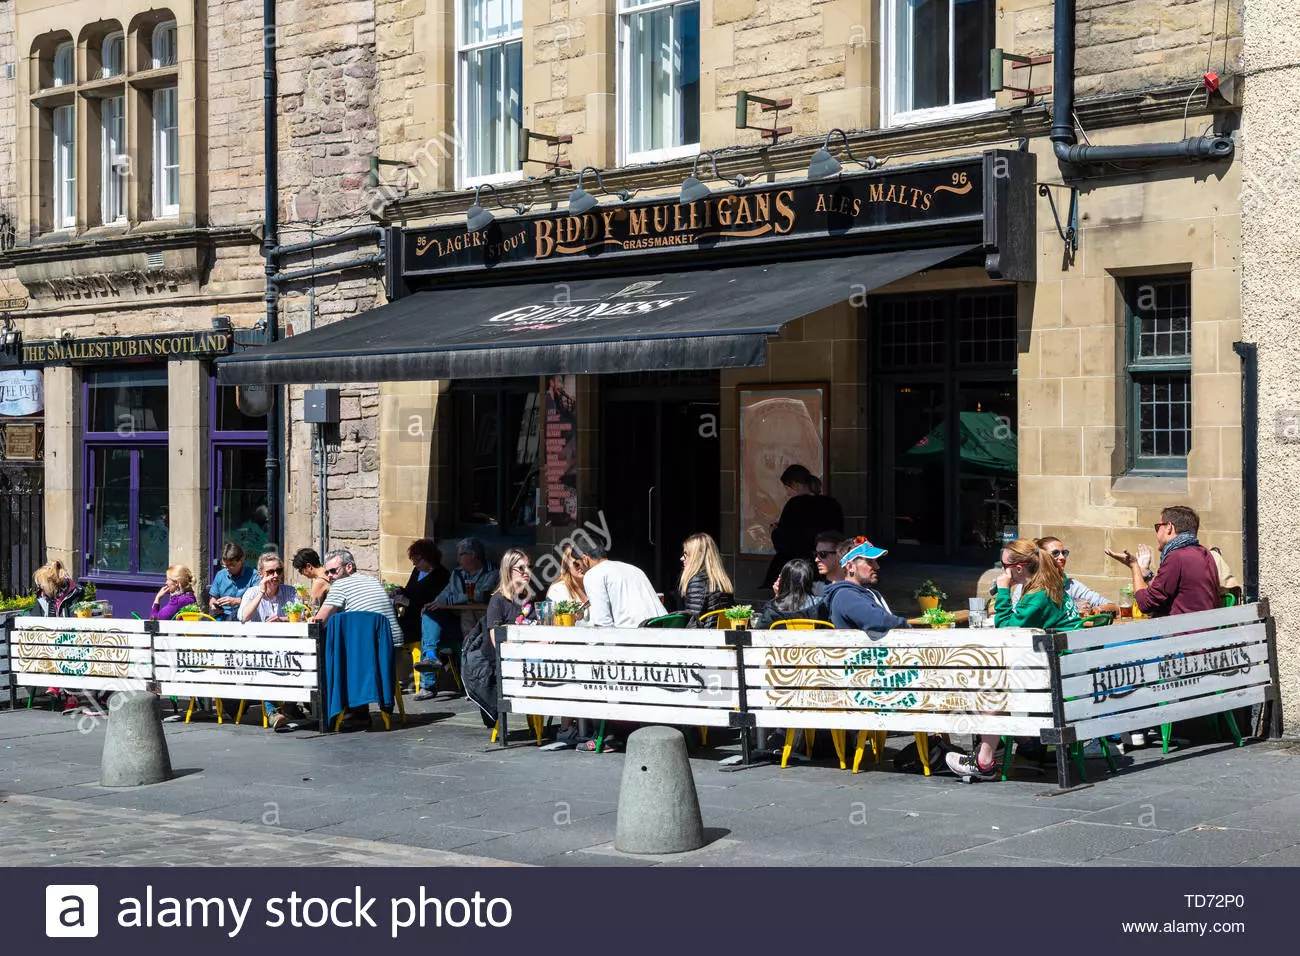 A stock image of the frontage of Biddy Mulligans